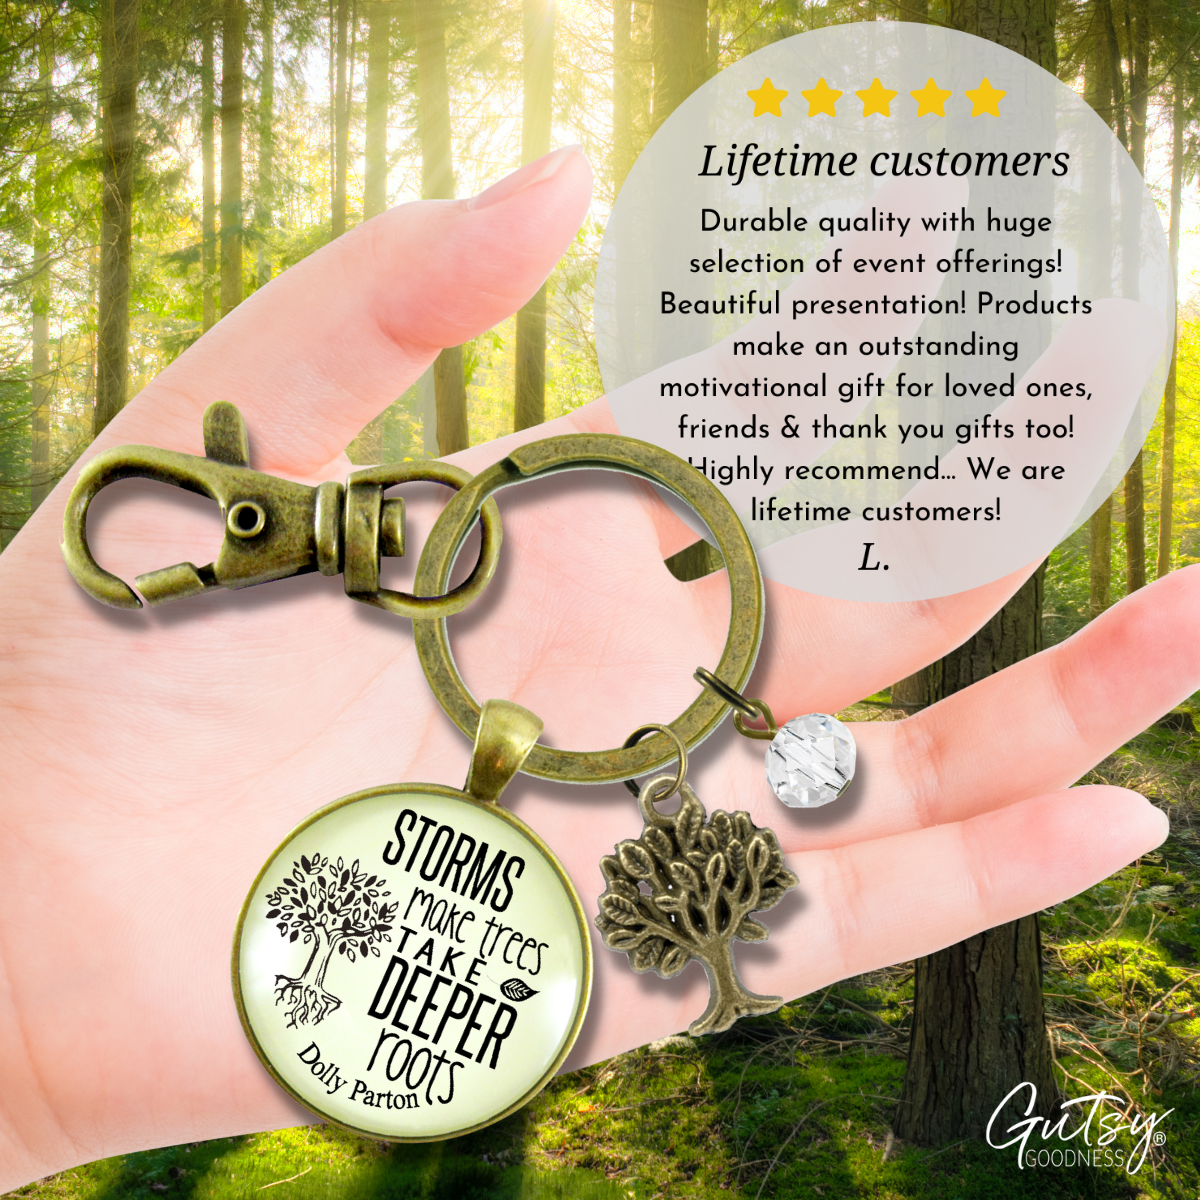 Storms Make Trees Take Deeper Roots Keychain Tree Charm - Gutsy Goodness